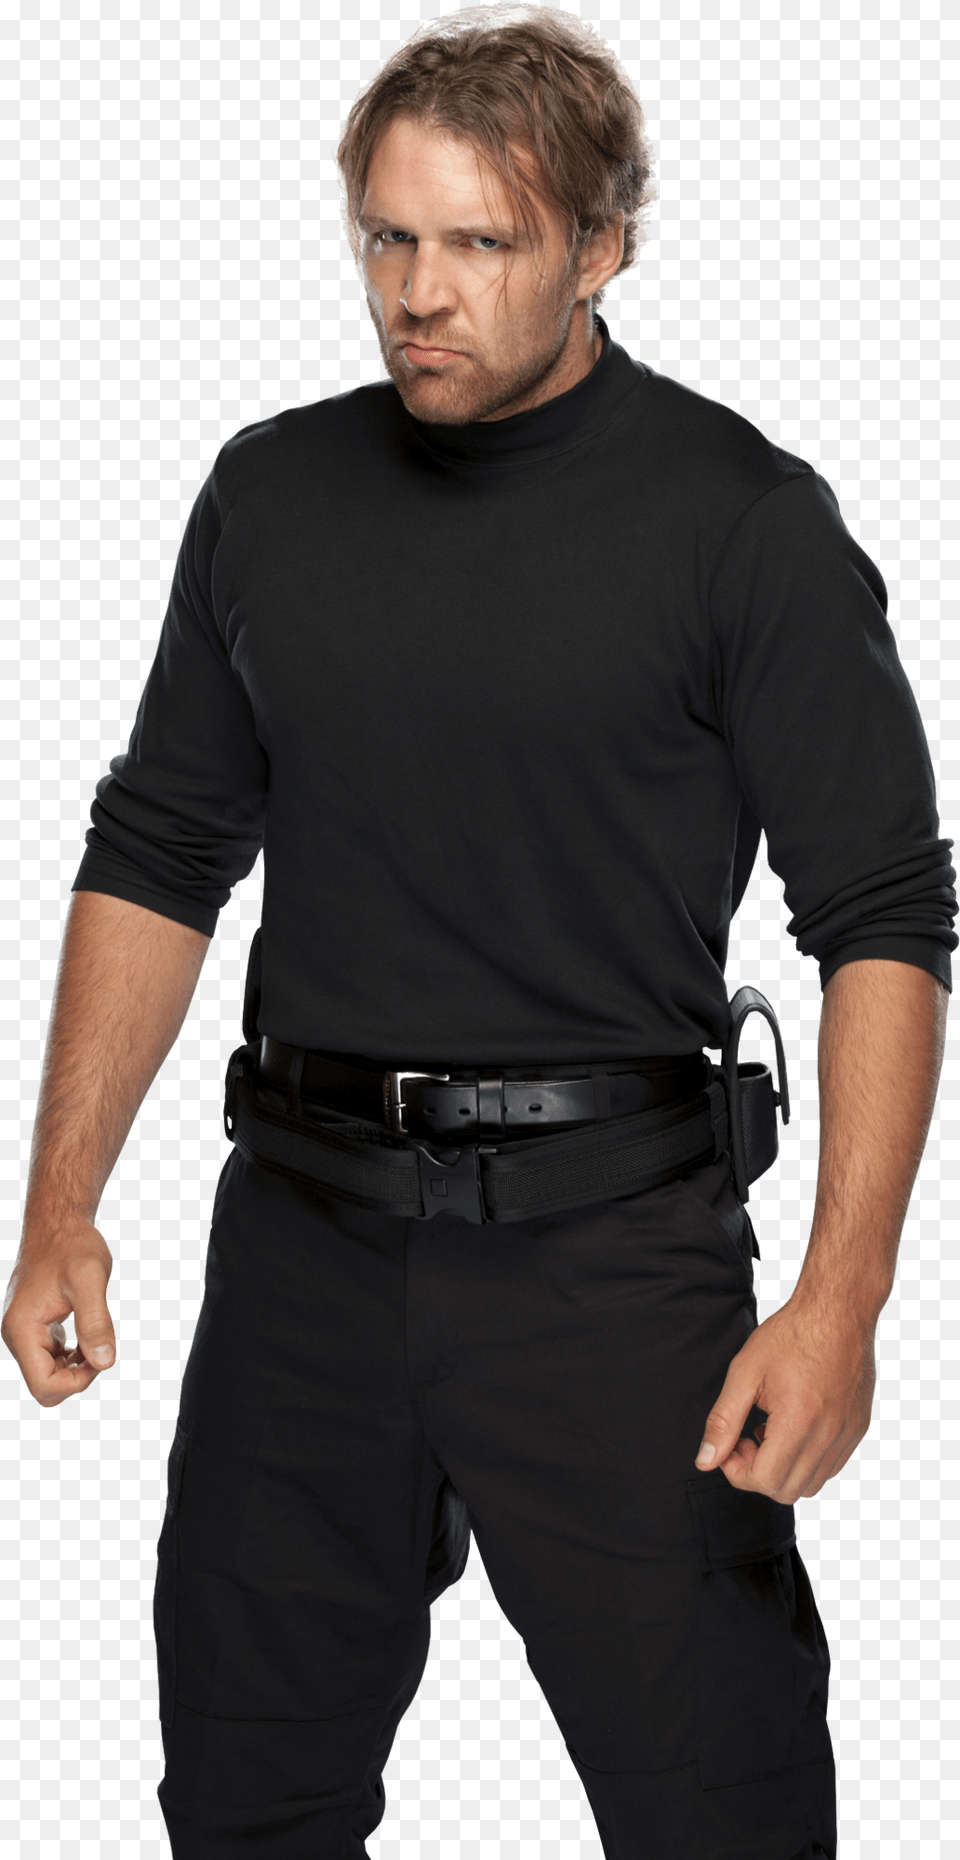 Elbow Dean Ambrose Debut In Wwe, Accessories, Long Sleeve, Belt, Buckle Free Transparent Png